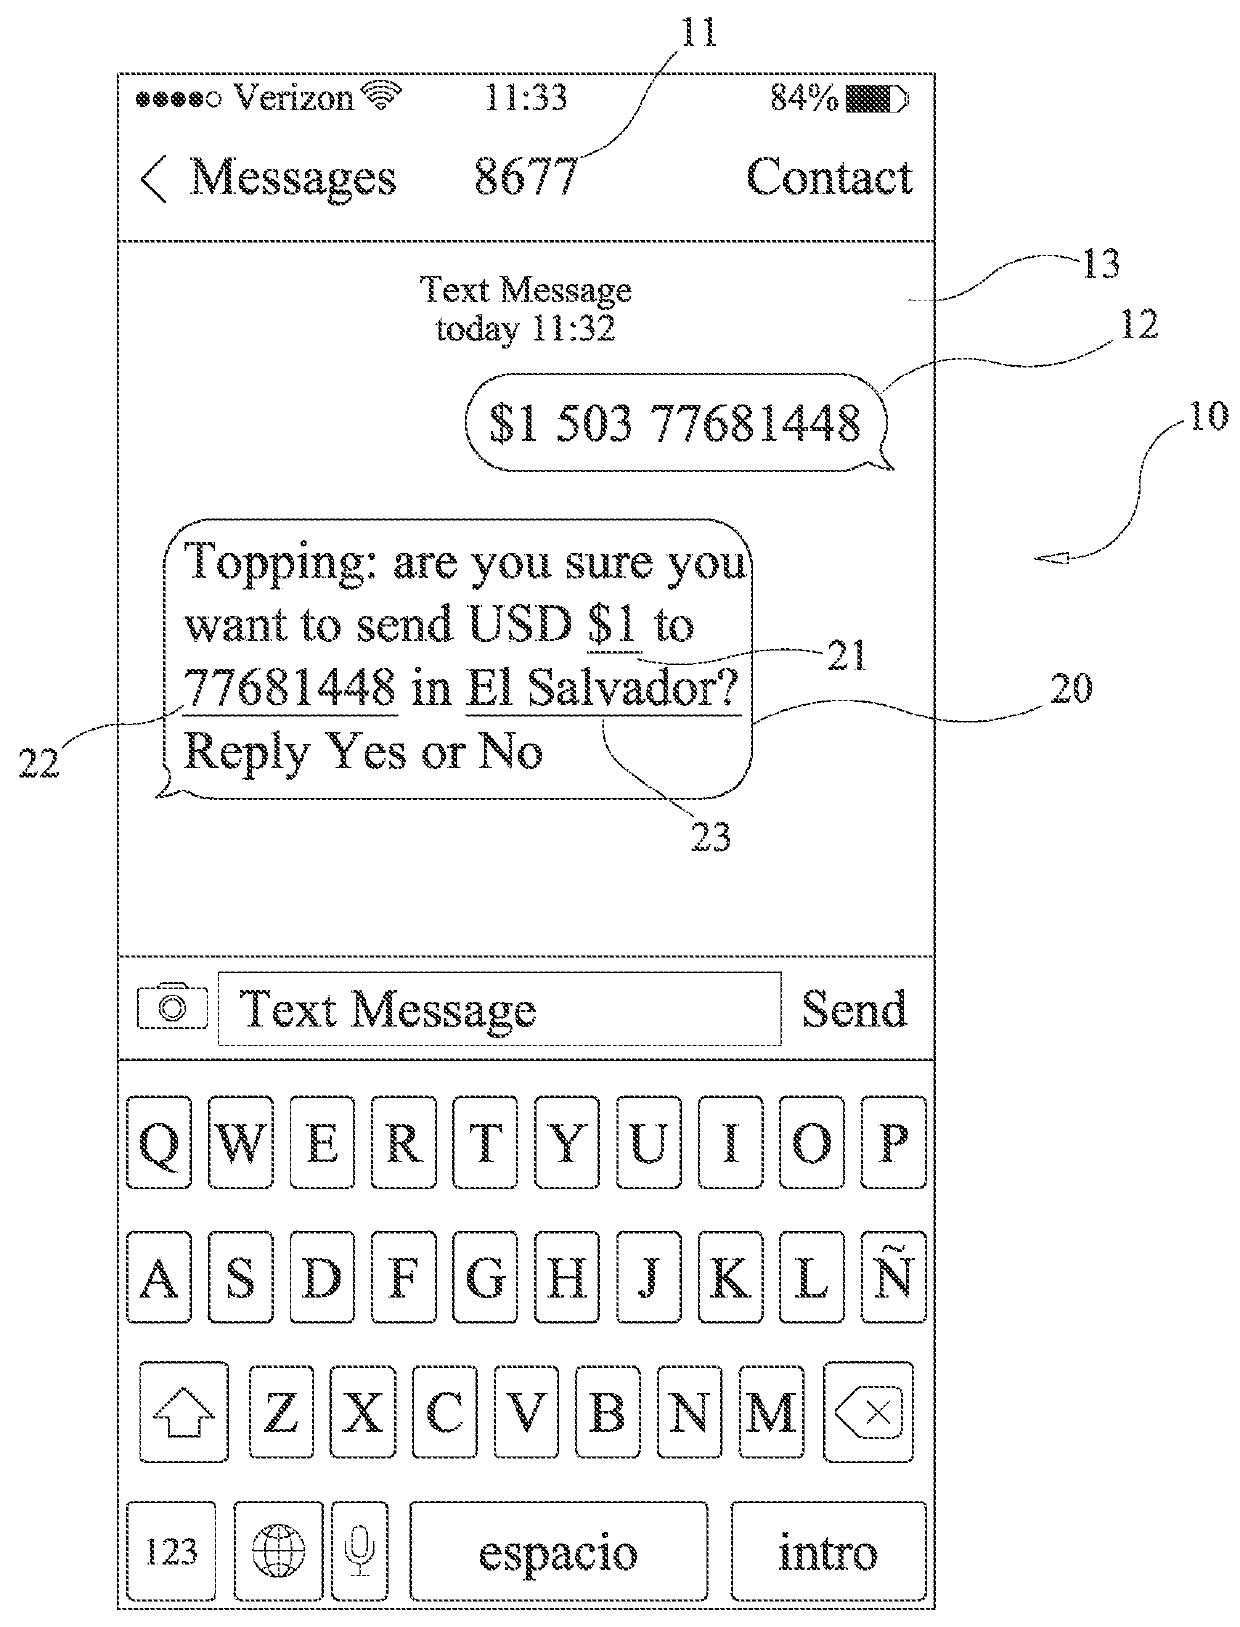 Method for financing purchases for others using a sender's charge account